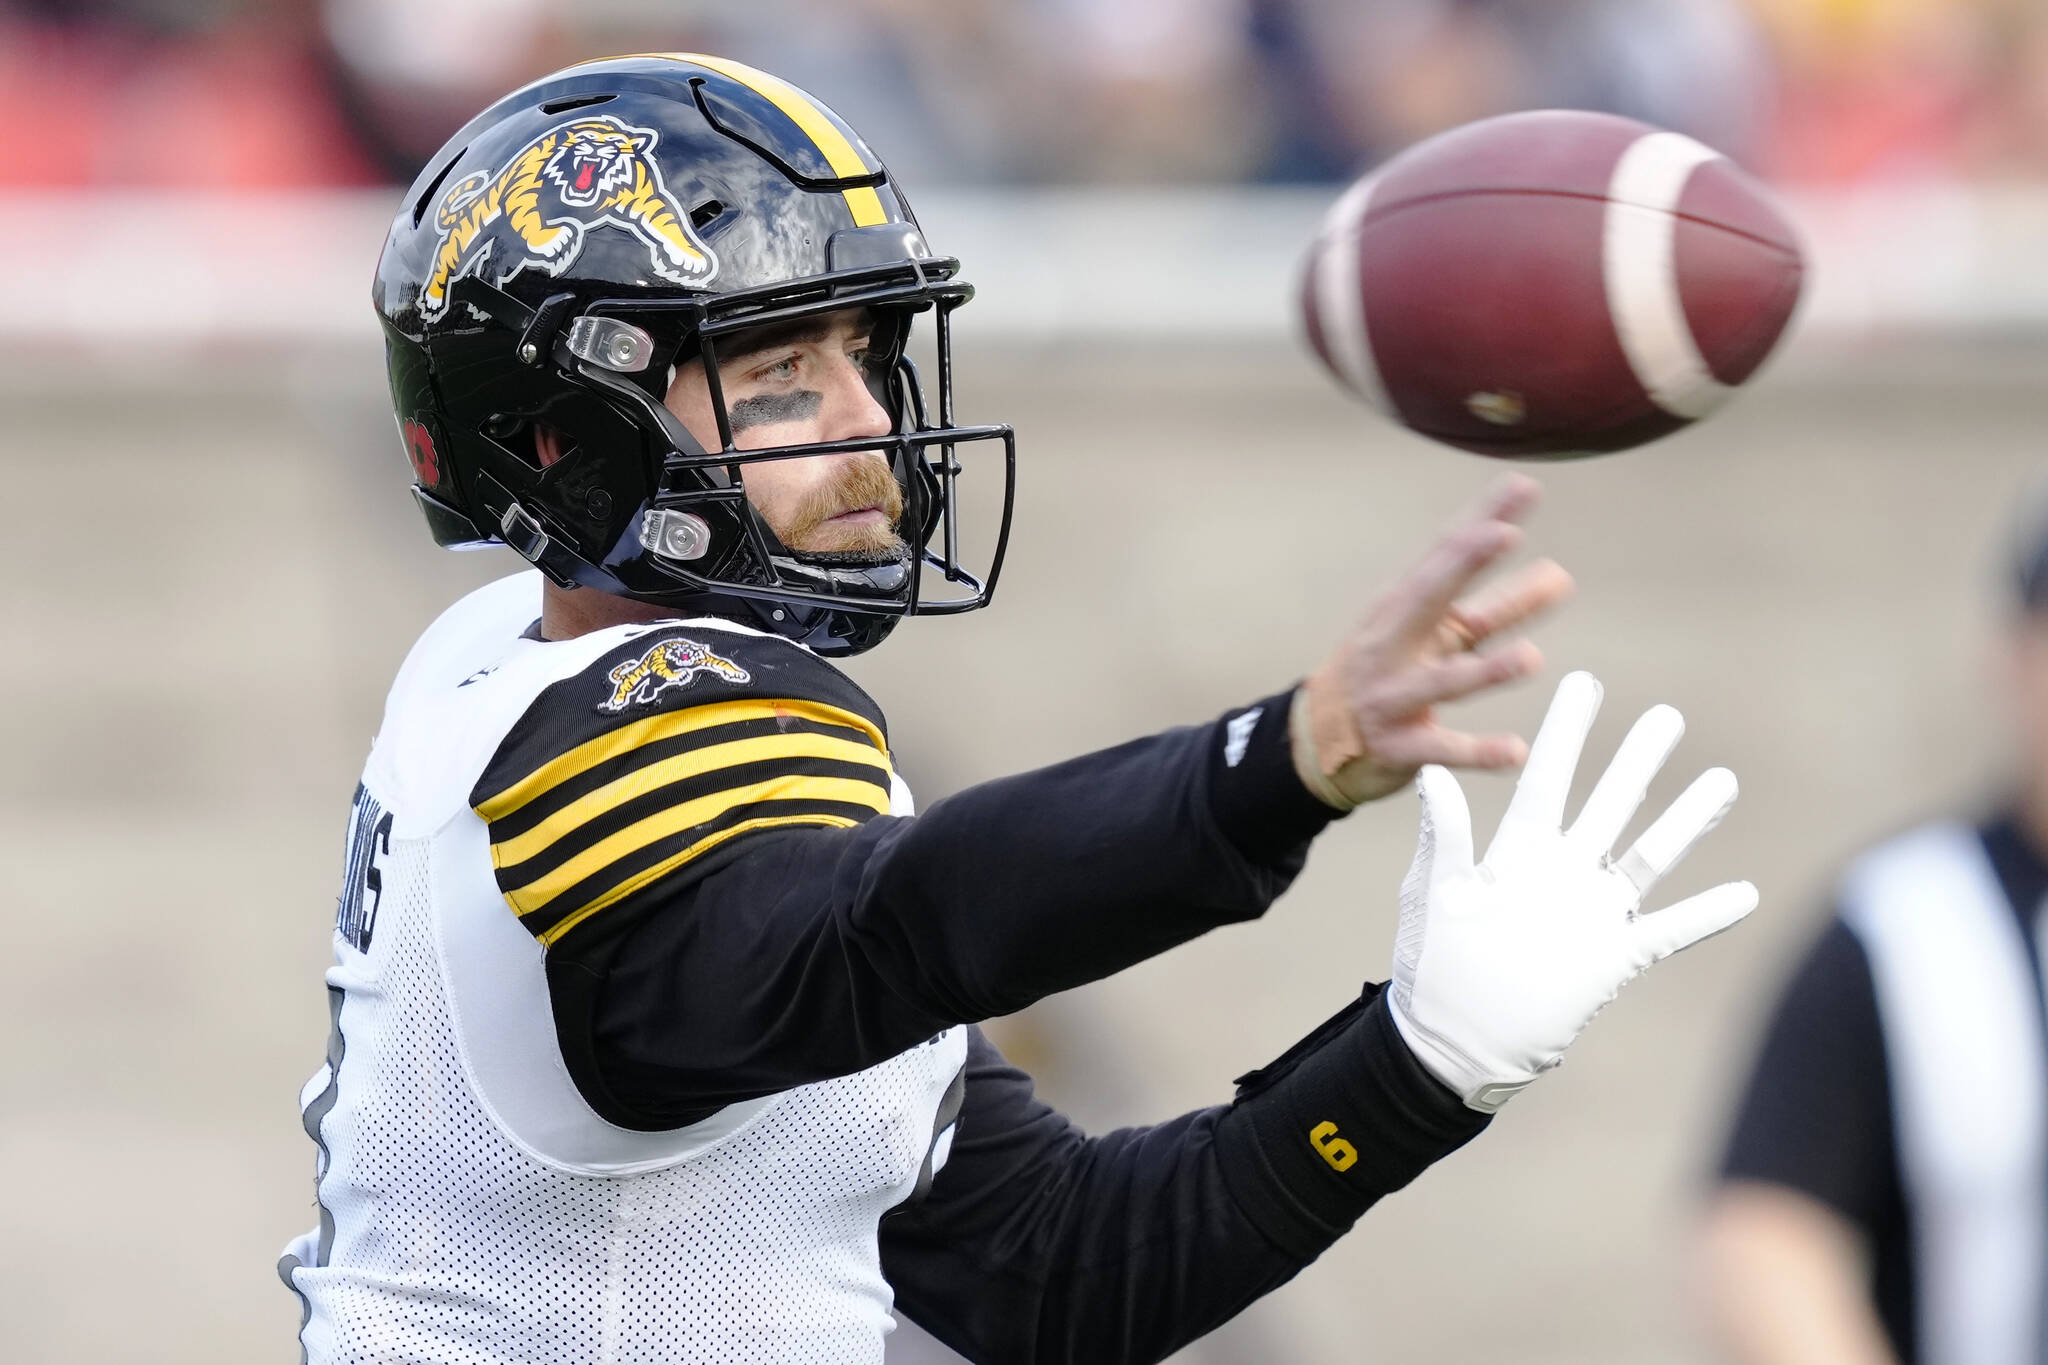 Hamilton Tiger-Cats quarterback Dane Evans (9) makes a pass during second quarter CFL Eastern semi-final football action against the Montreal Alouettes on Sunday, November 6, 2022 in Montreal. THE CANADIAN PRESS/Paul Chiasson